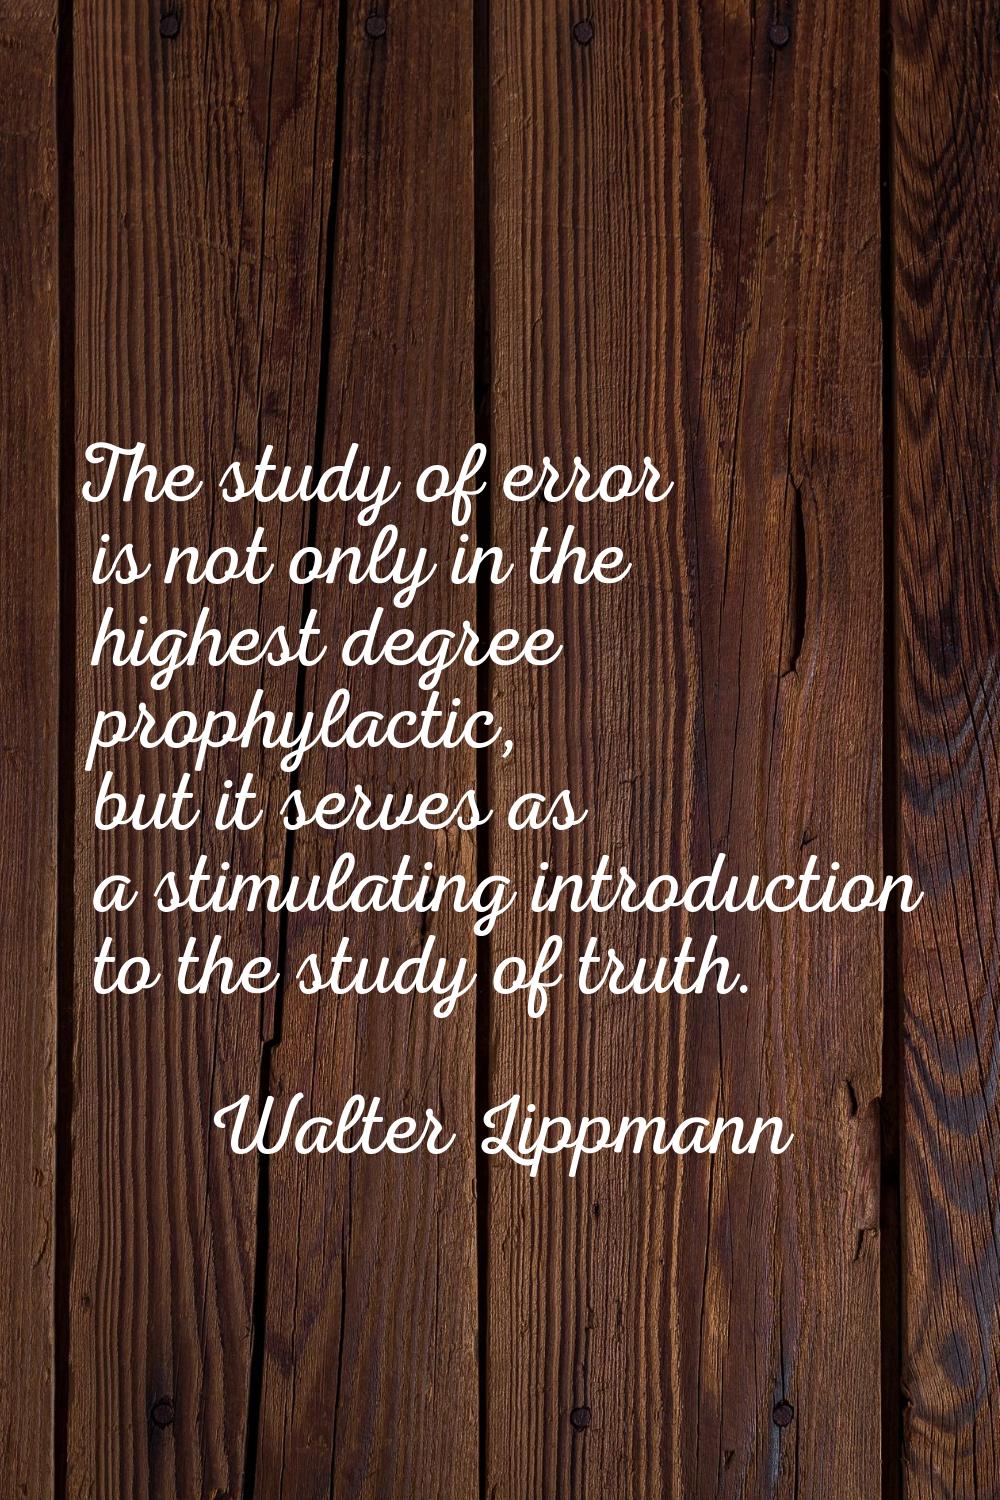 The study of error is not only in the highest degree prophylactic, but it serves as a stimulating i